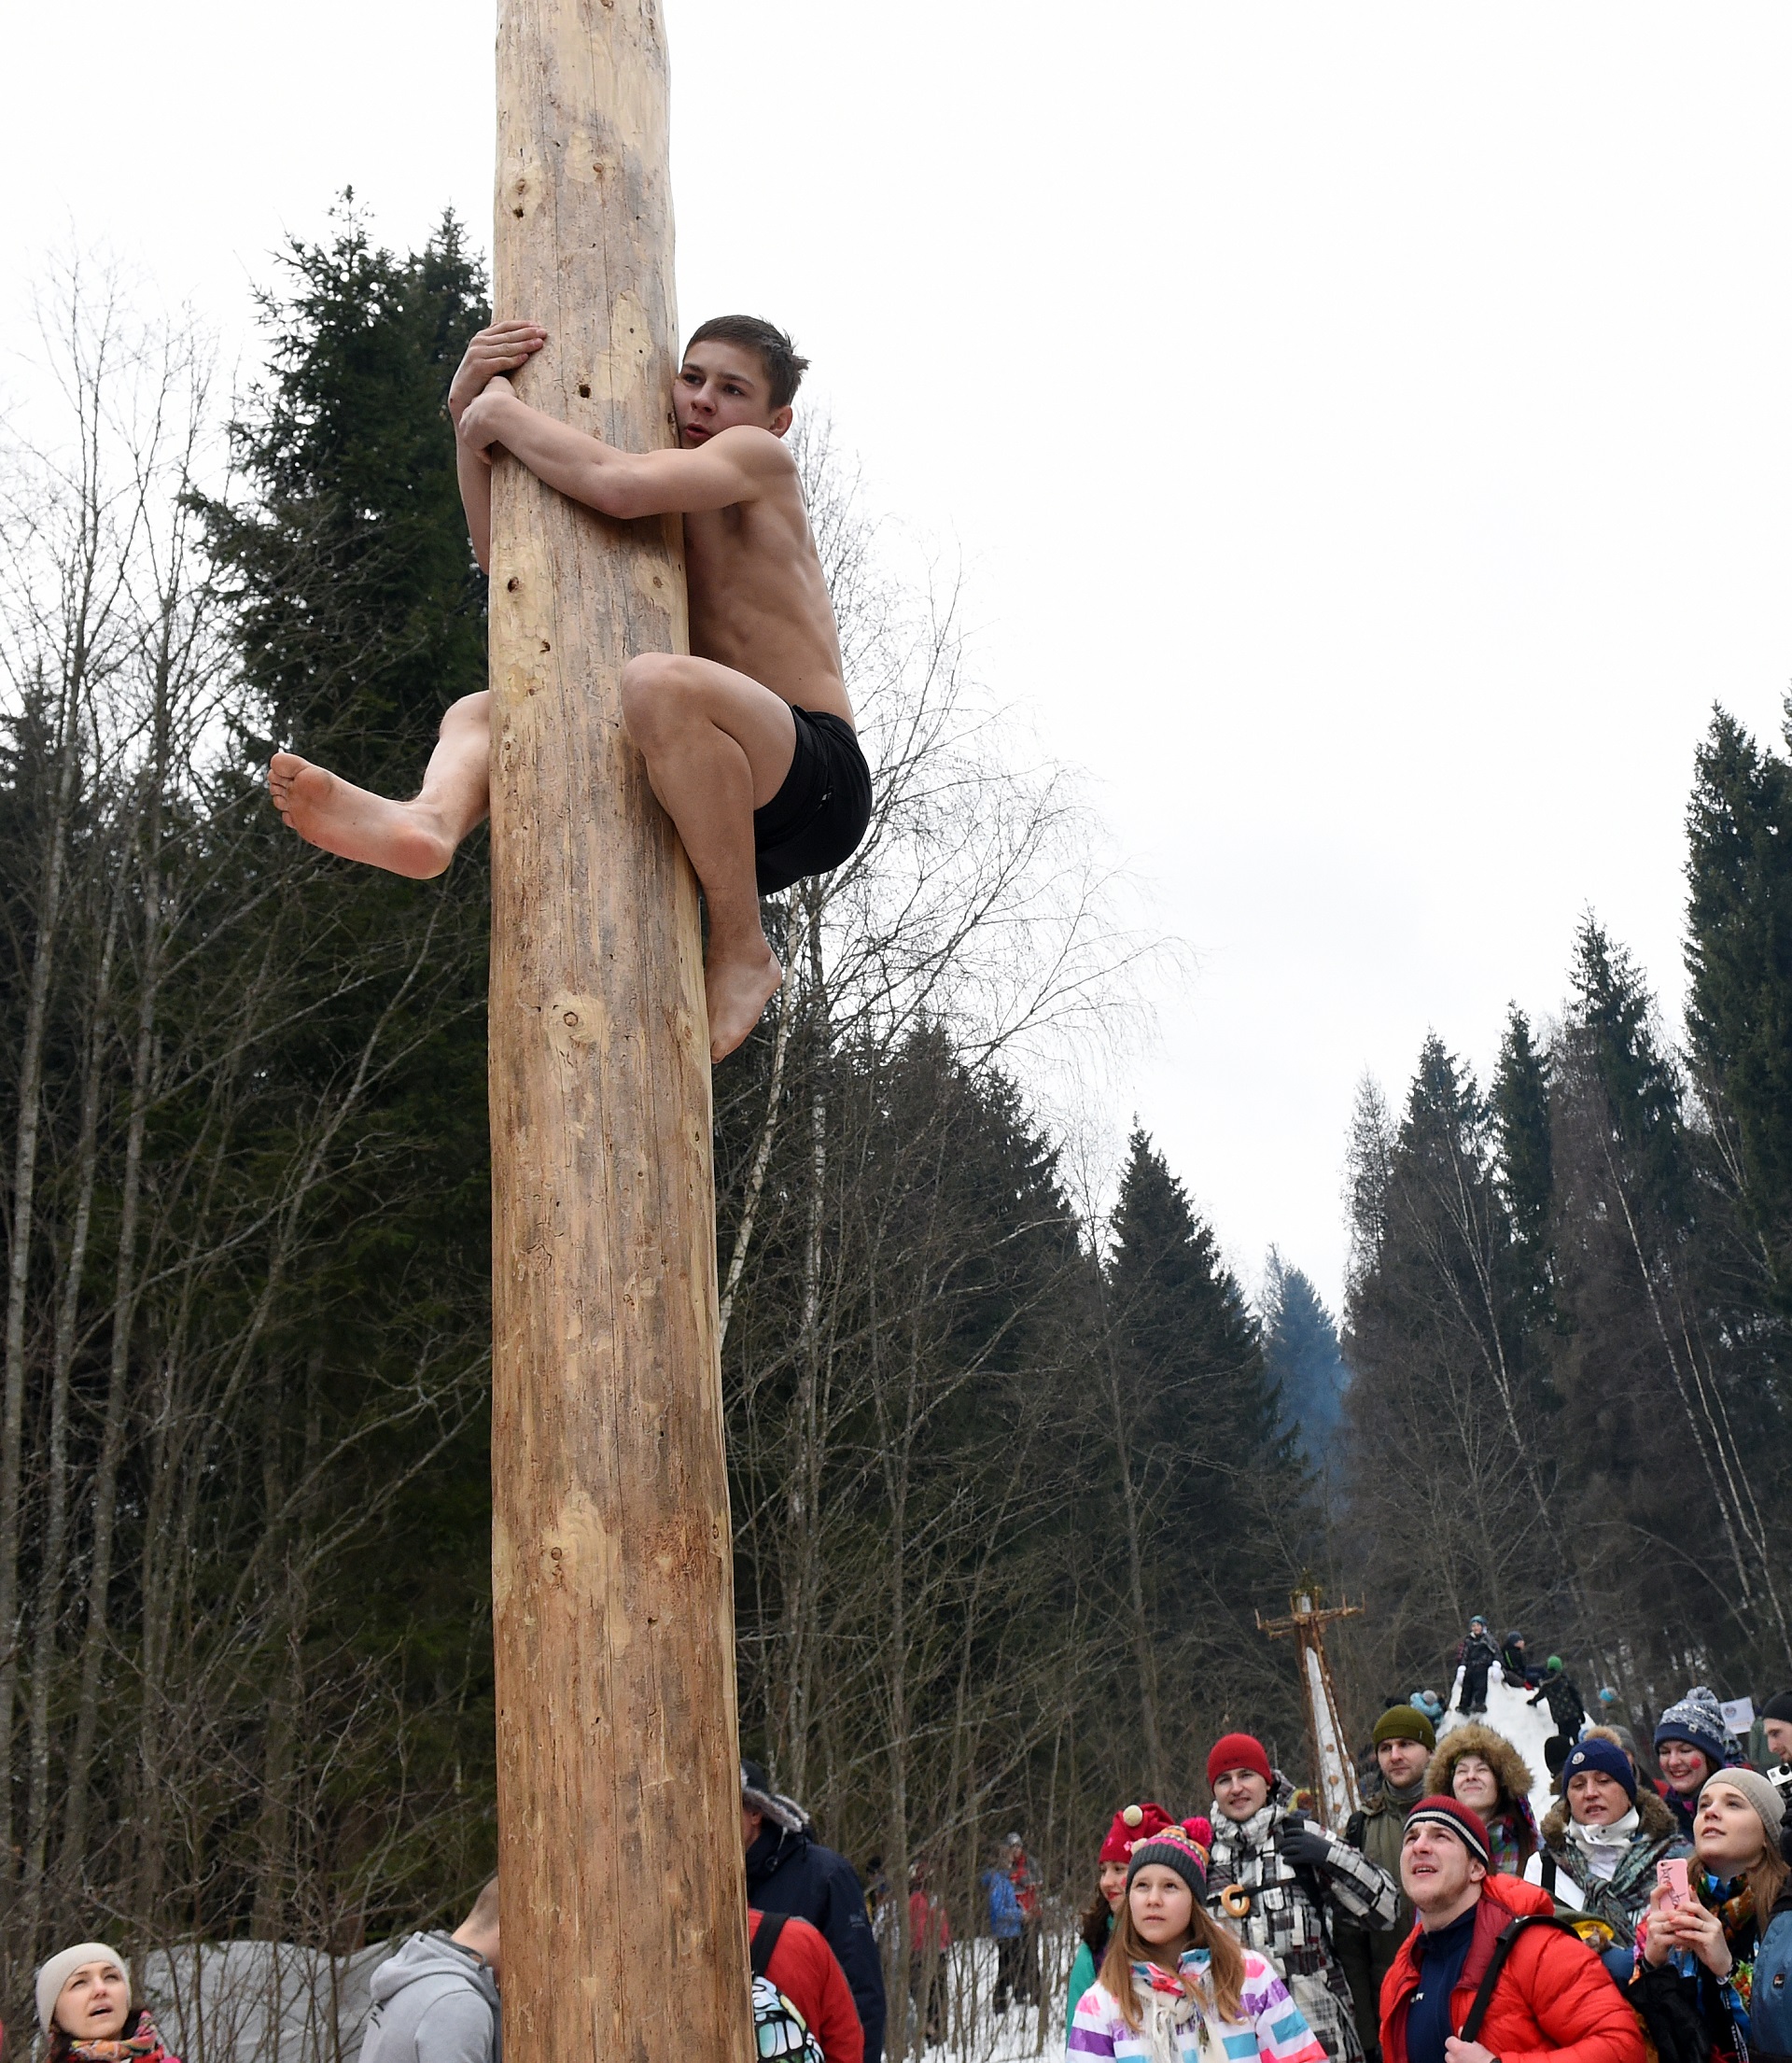 Young man competes in the pole-climb game close to the village of Abramtsevo, 60 km north of Moscow on March 13, 2016, in celebration of Maslenitsa (Shrovetide), a farewell ceremony to winter. Shrovetide precedes the beginning of Lent, with each day of the week holding its own meaning. Shrove Sunday, also known as the Sunday of Forgiveness, is a day for asking forgiveness for the harm caused to other people intentionally or unintentionally. / AFP PHOTO / VASILY MAXIMOV